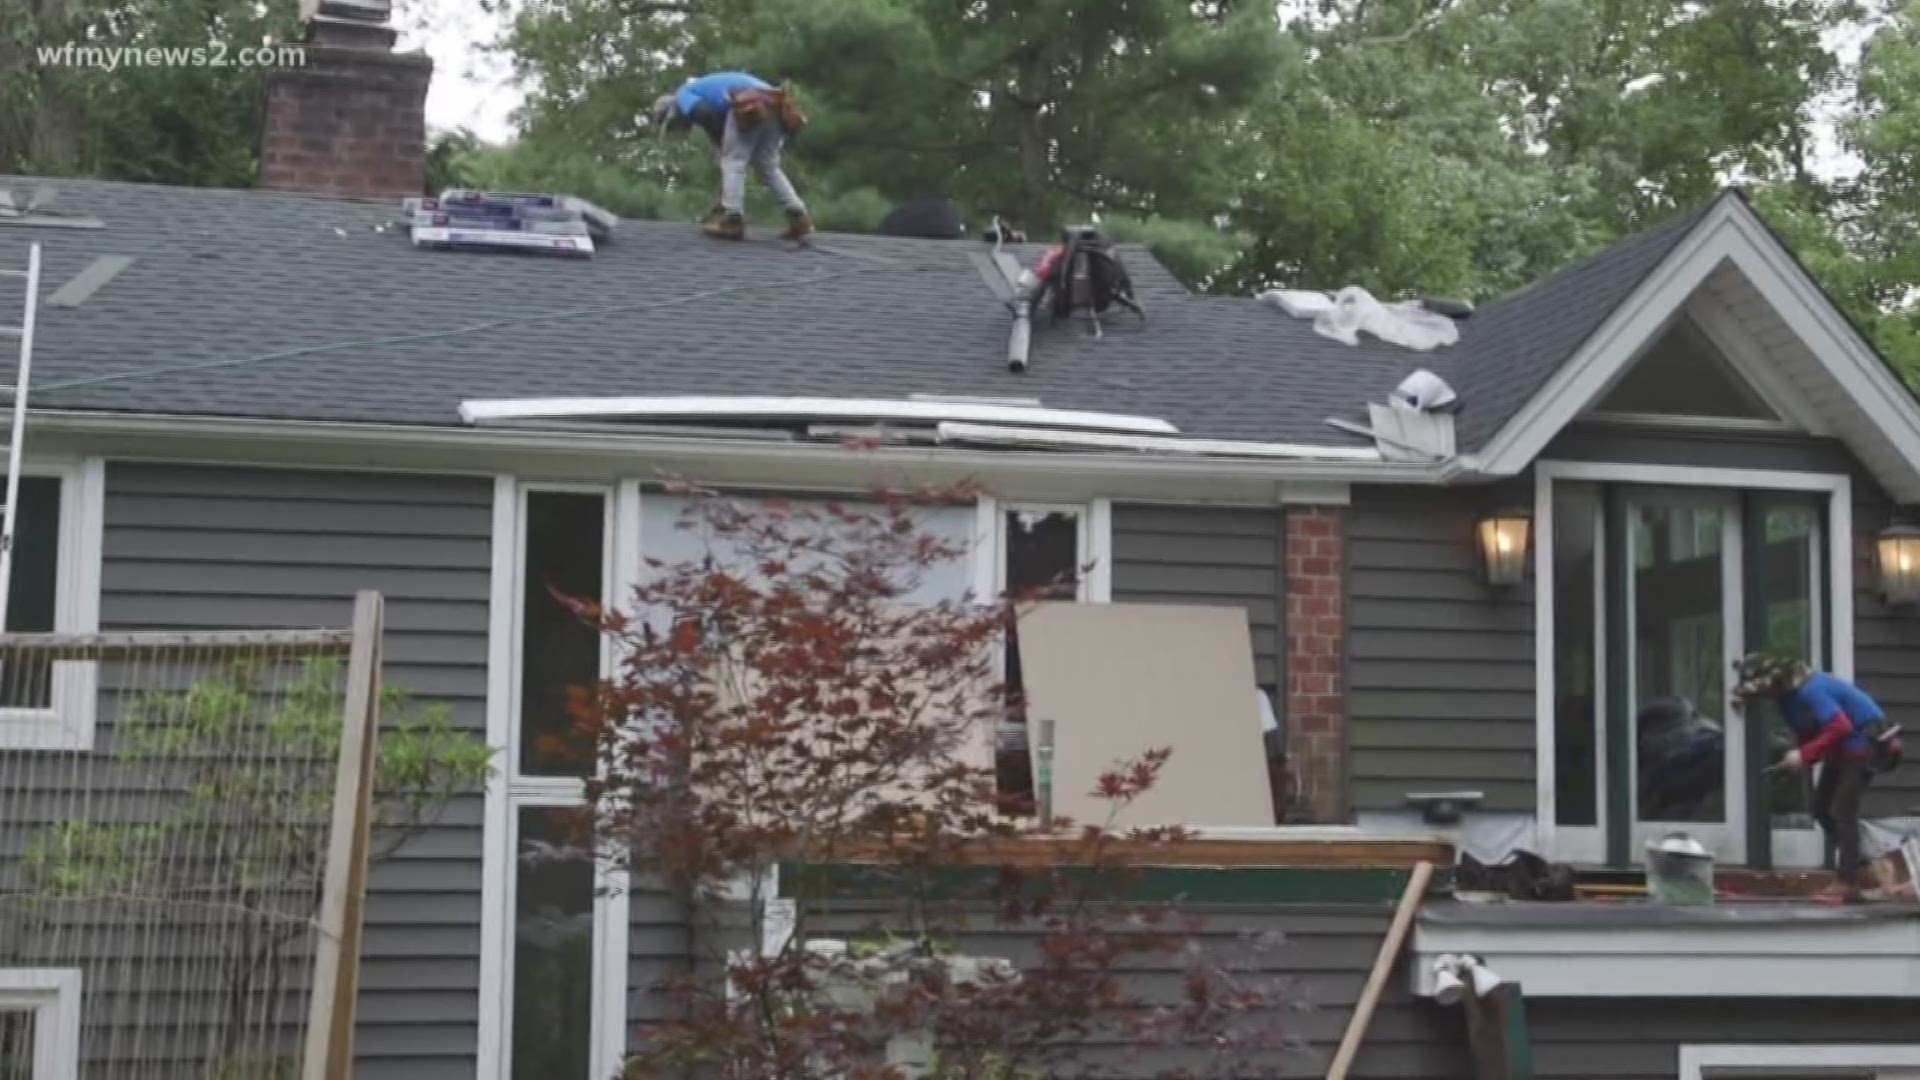 Consumer Reports tested a variety of shingles to help you figure out what’ll keep your home safe & dry the best.